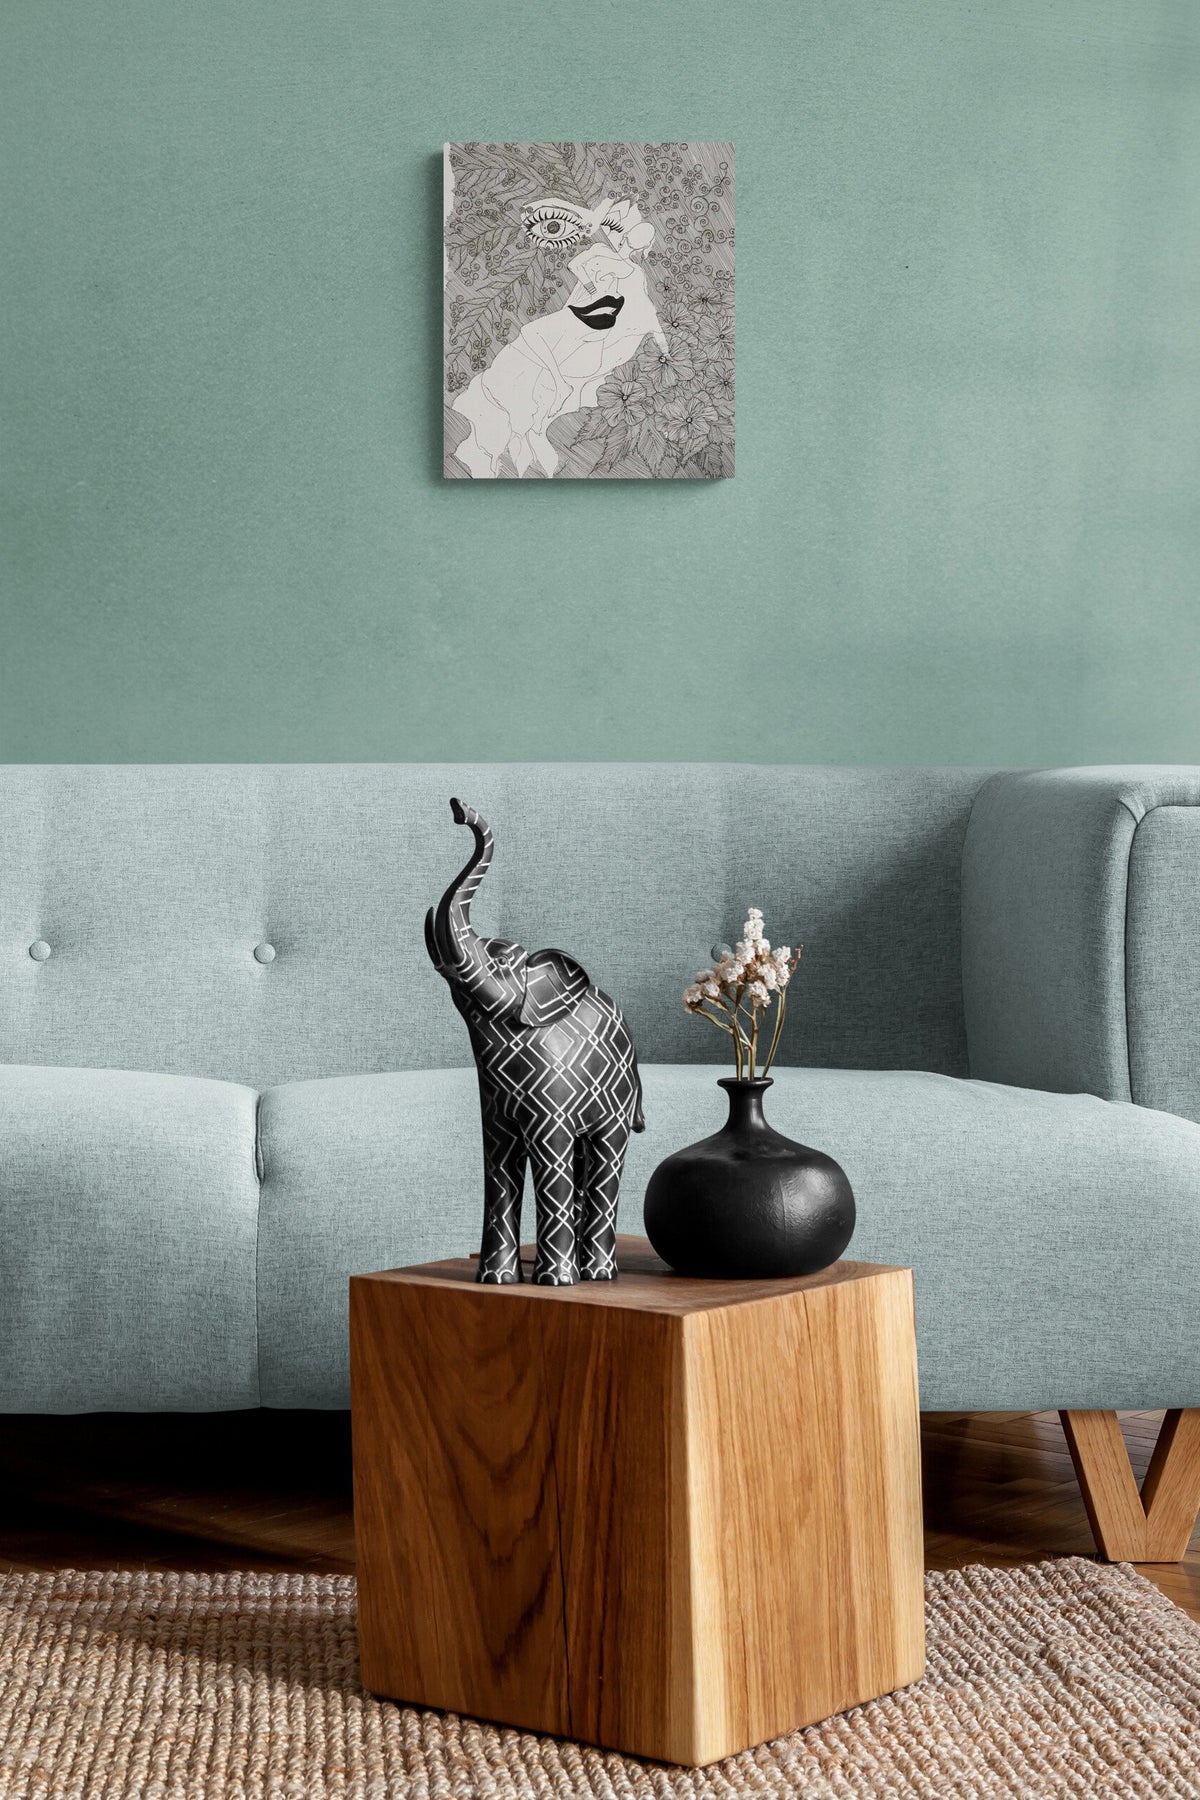 Striking Figural Female Painting in greyscale compliments this natural living space